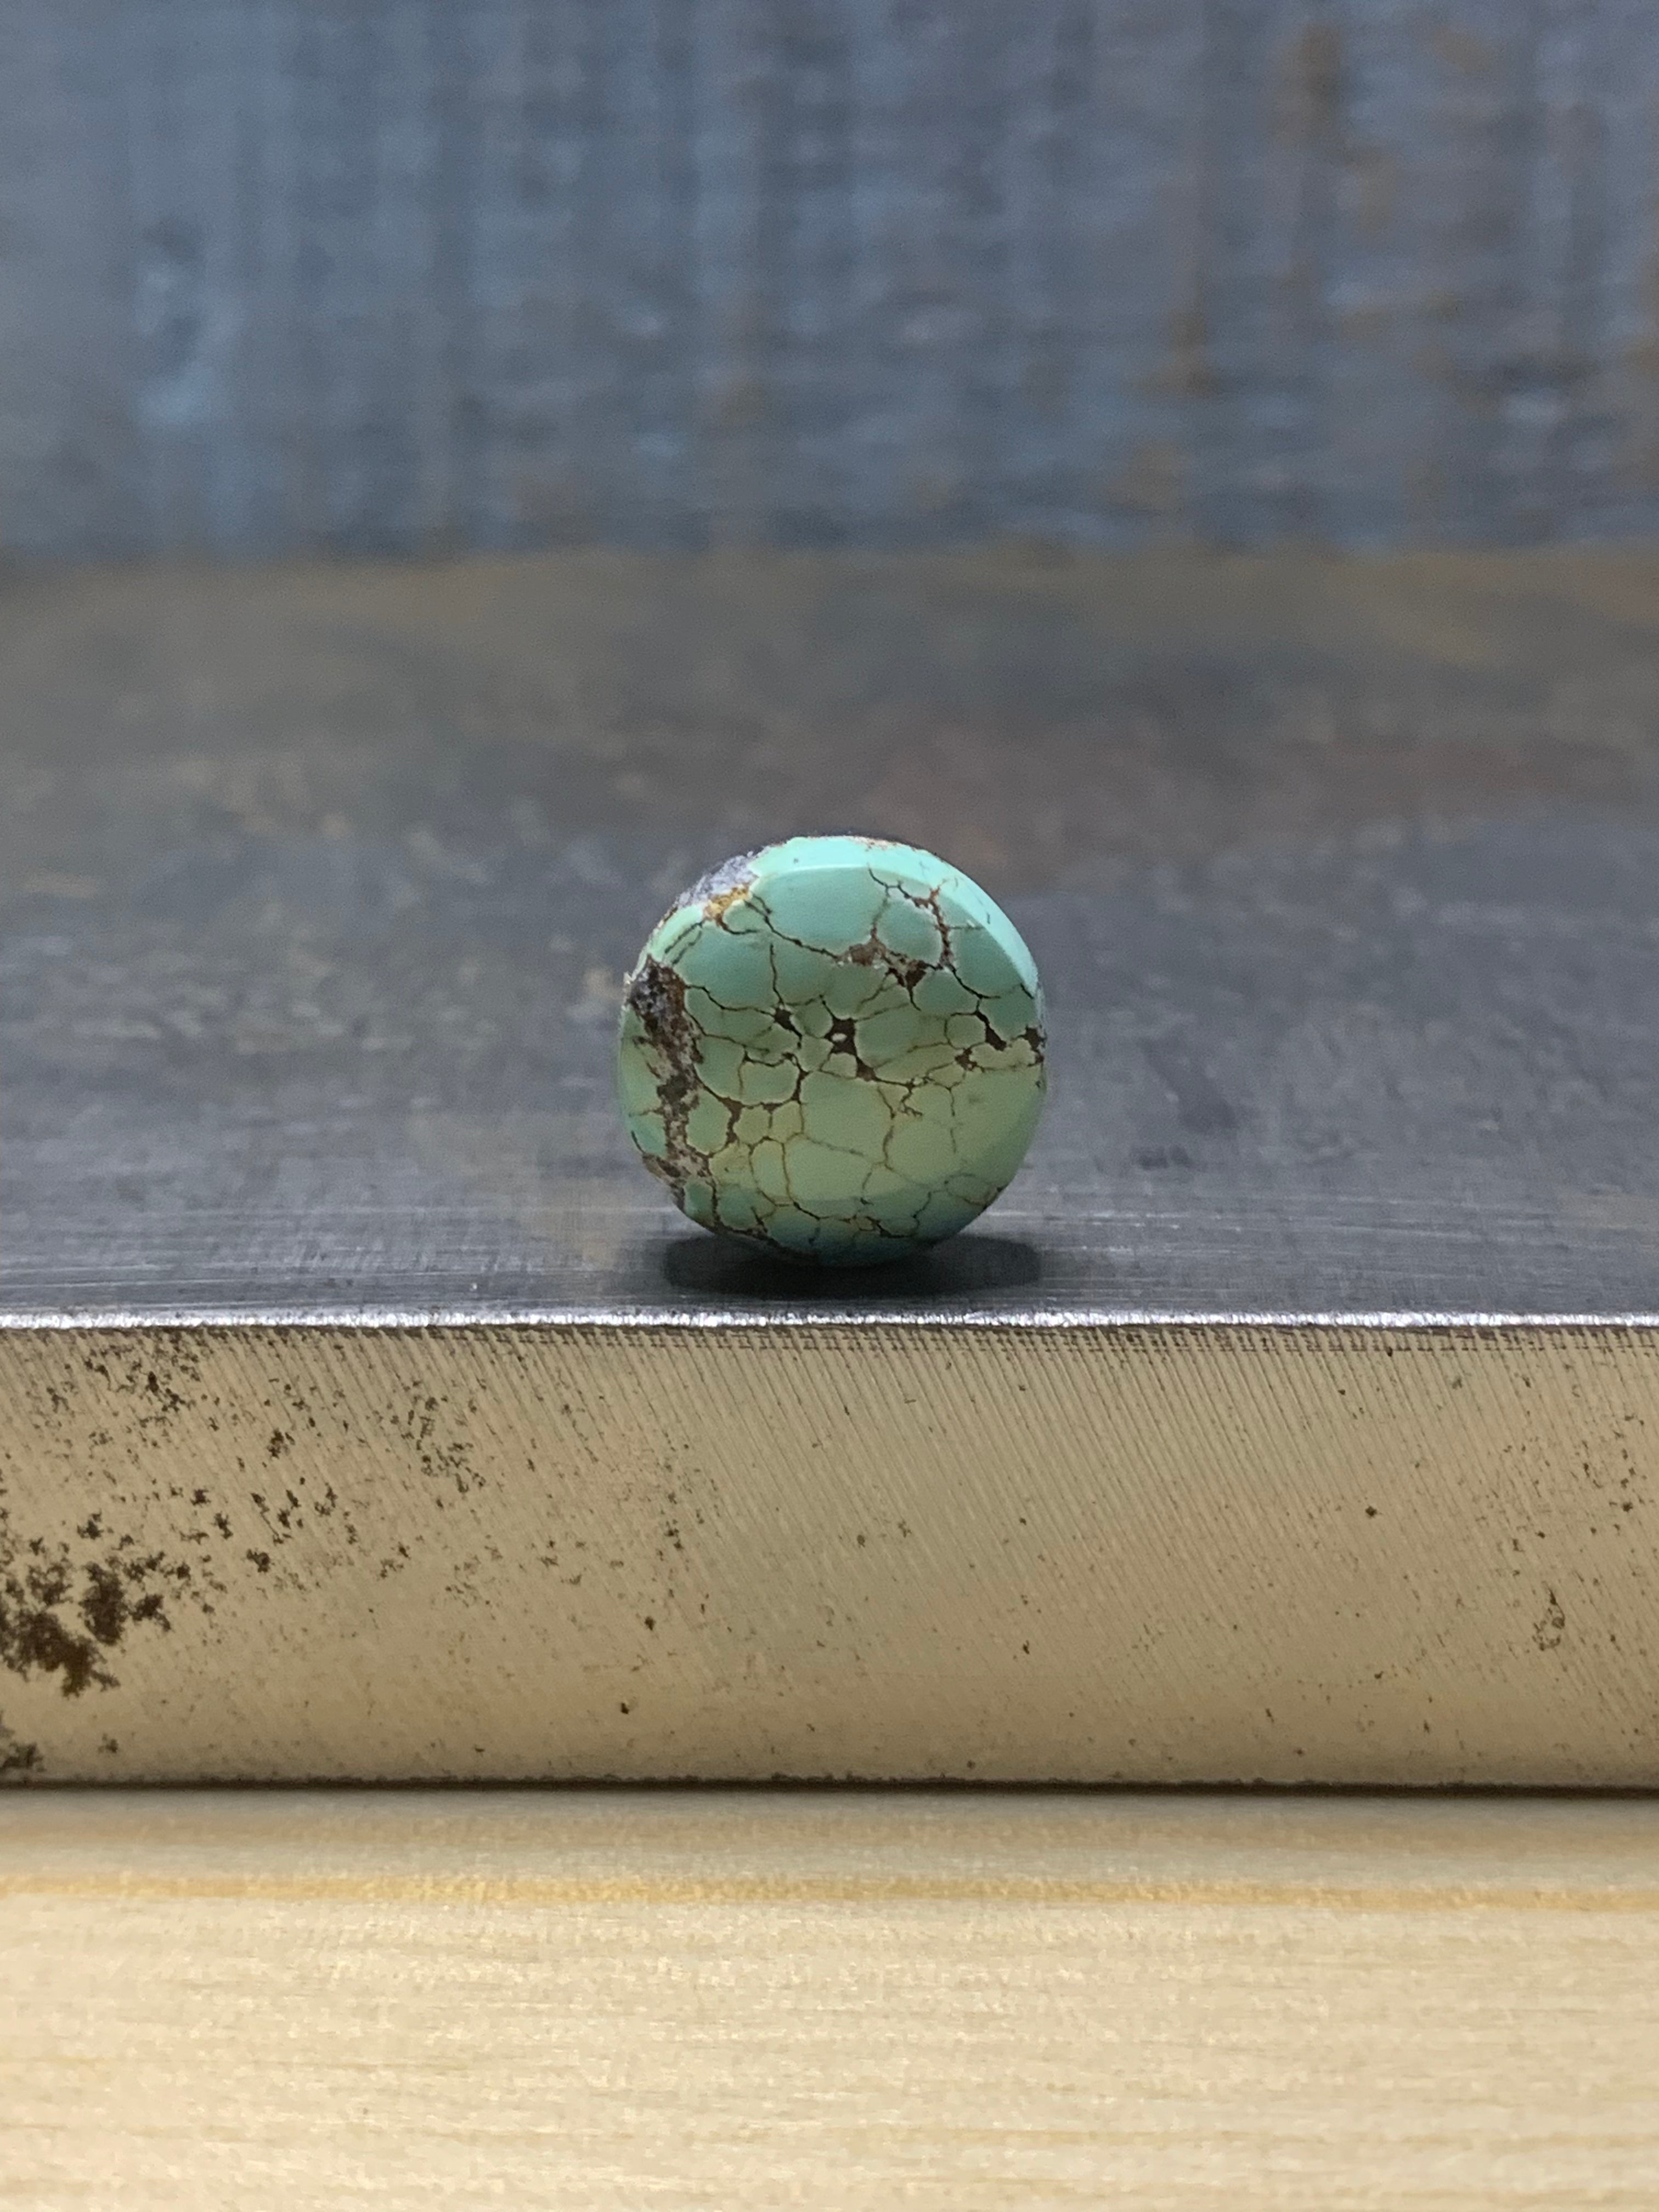 Select a 12mm round turquoise stone - Click to see all options